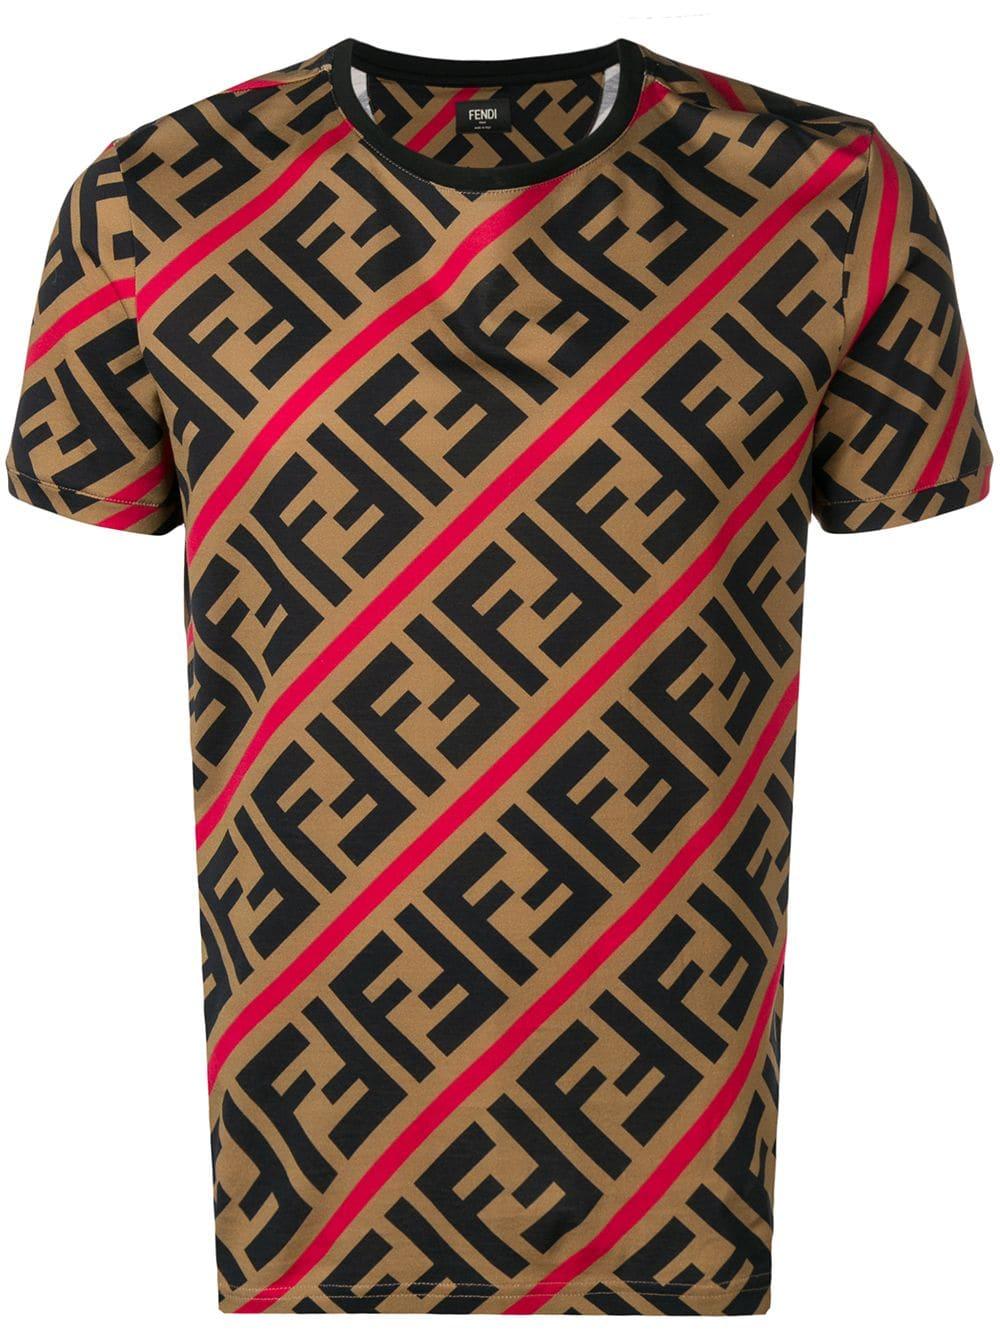 Fendi Cotton Double F Logo T-shirt in Brown for Men - Save 27% - Lyst